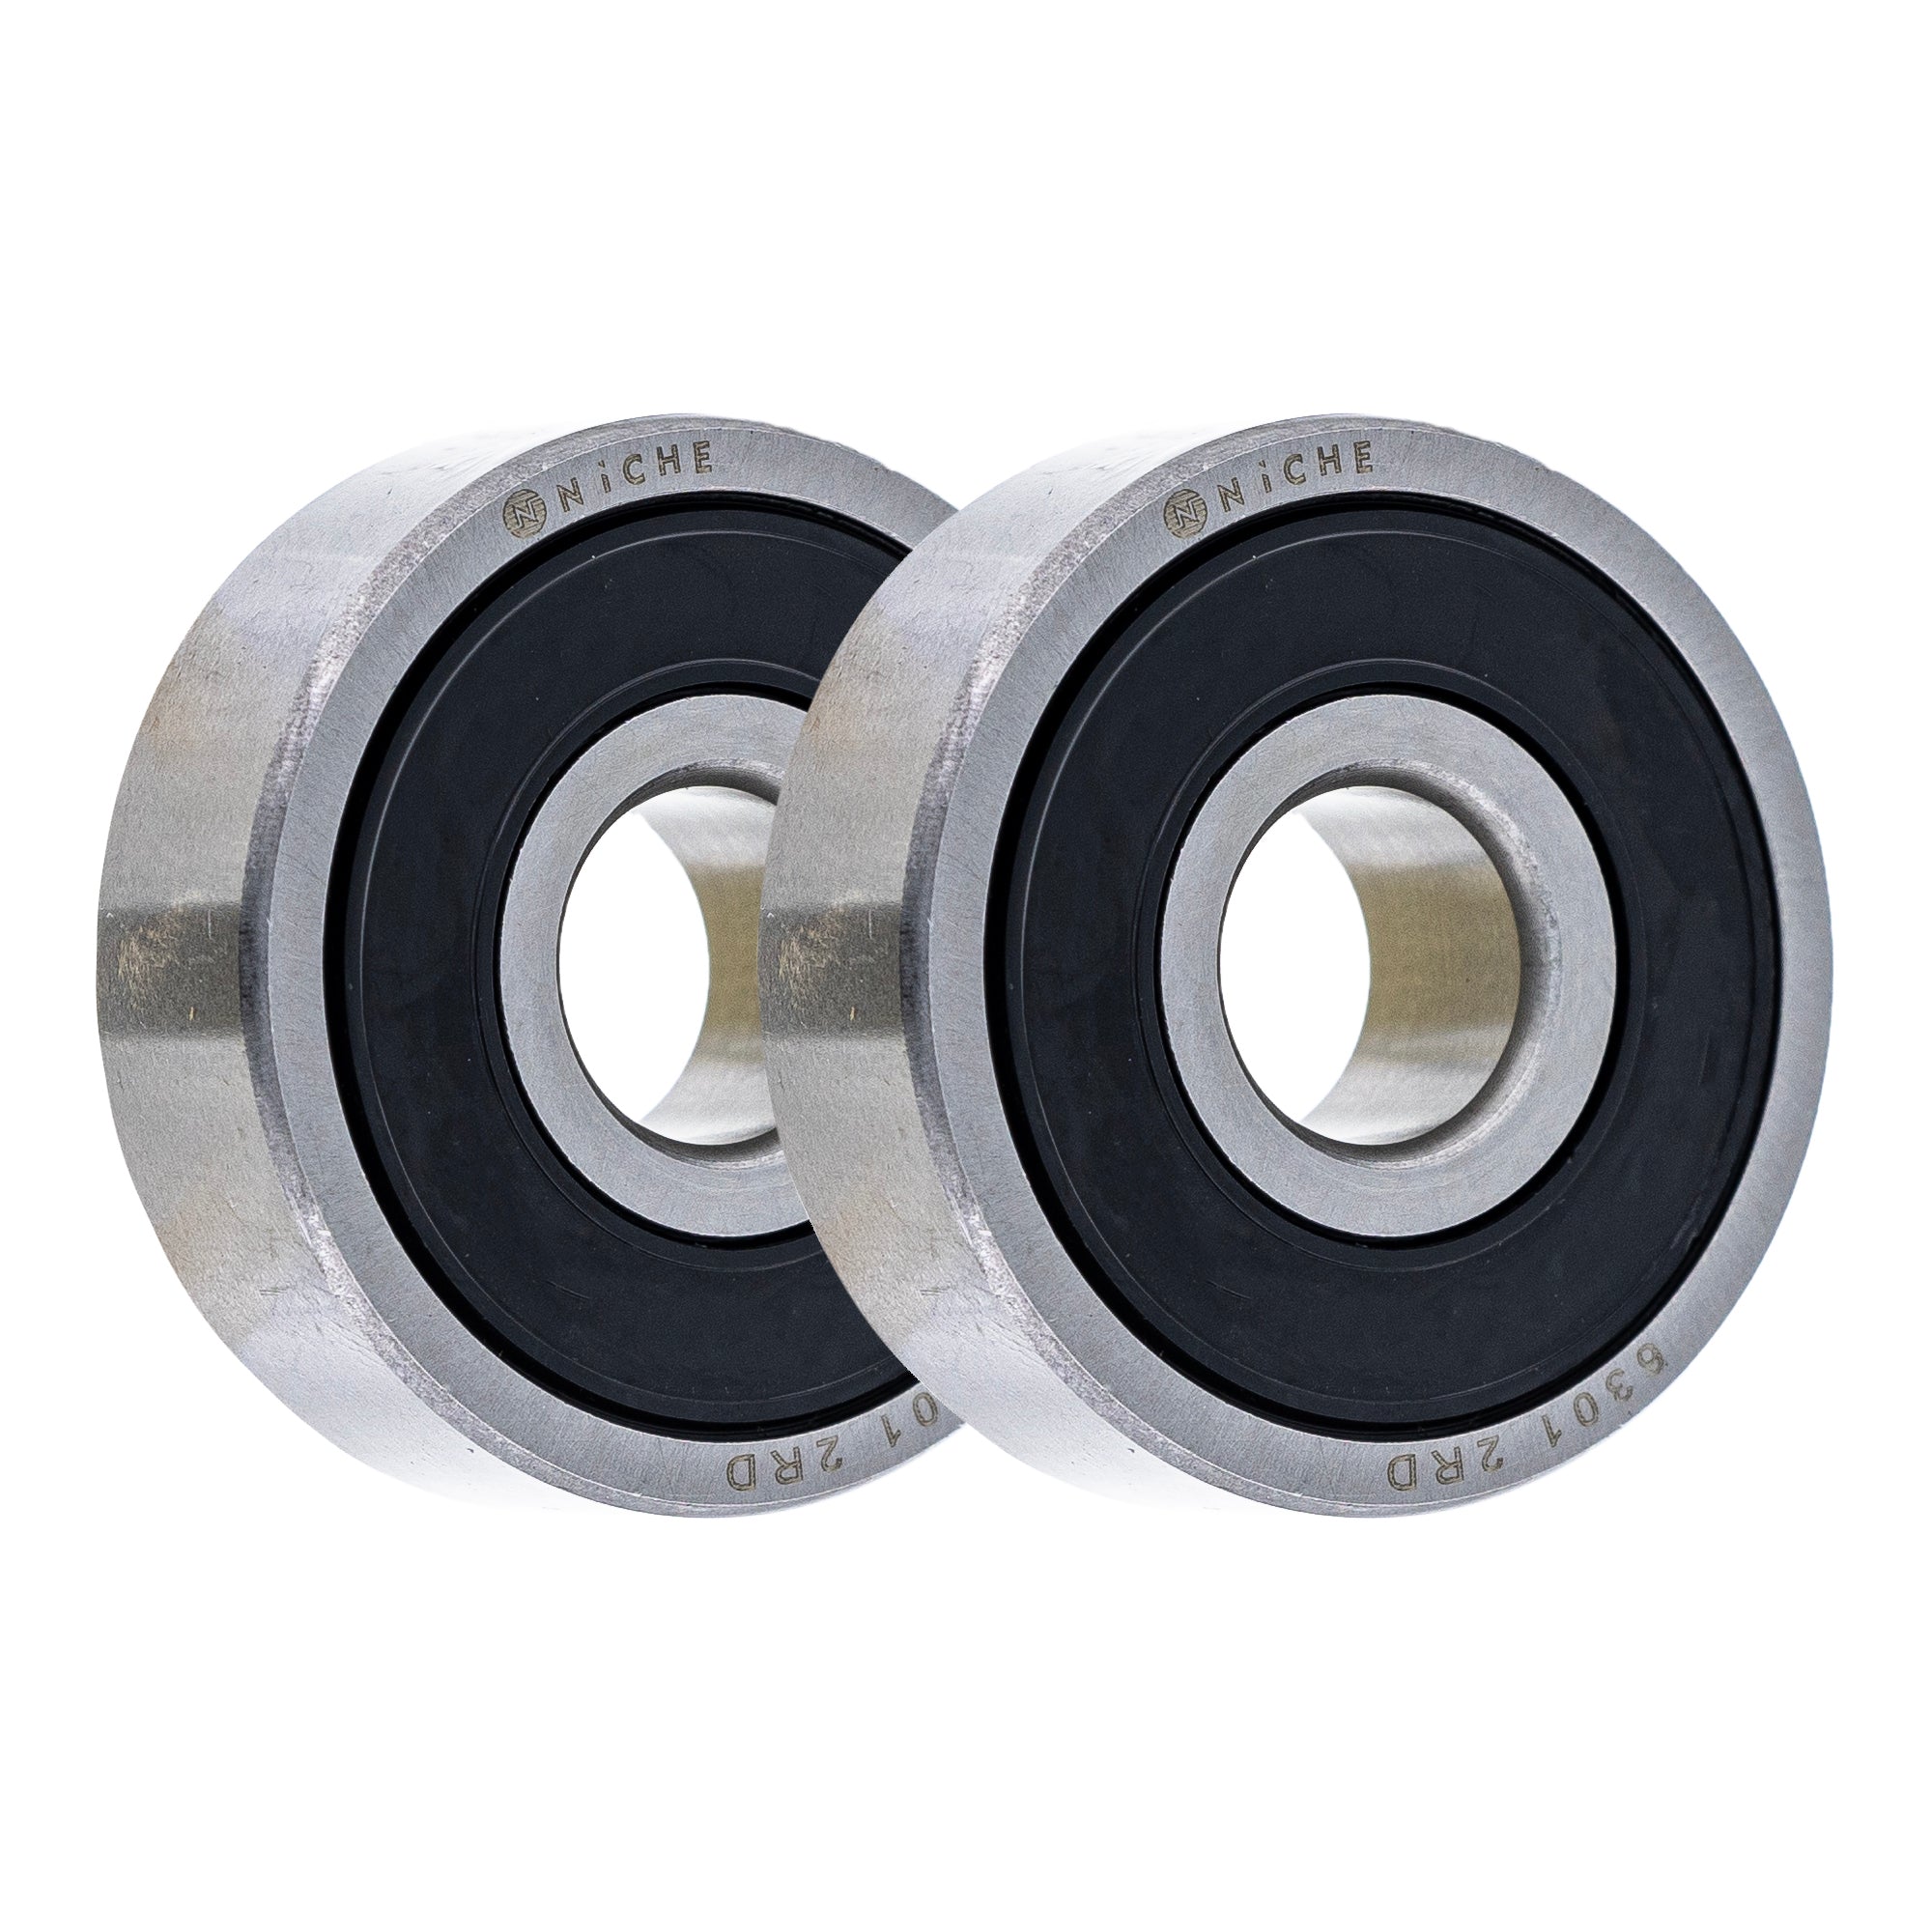 Electric Grade, Single Row, Deep Groove, Ball Bearing 2-Pack for zOTHER ZB50 XR80R XR80 NICHE 519-CBB2342R